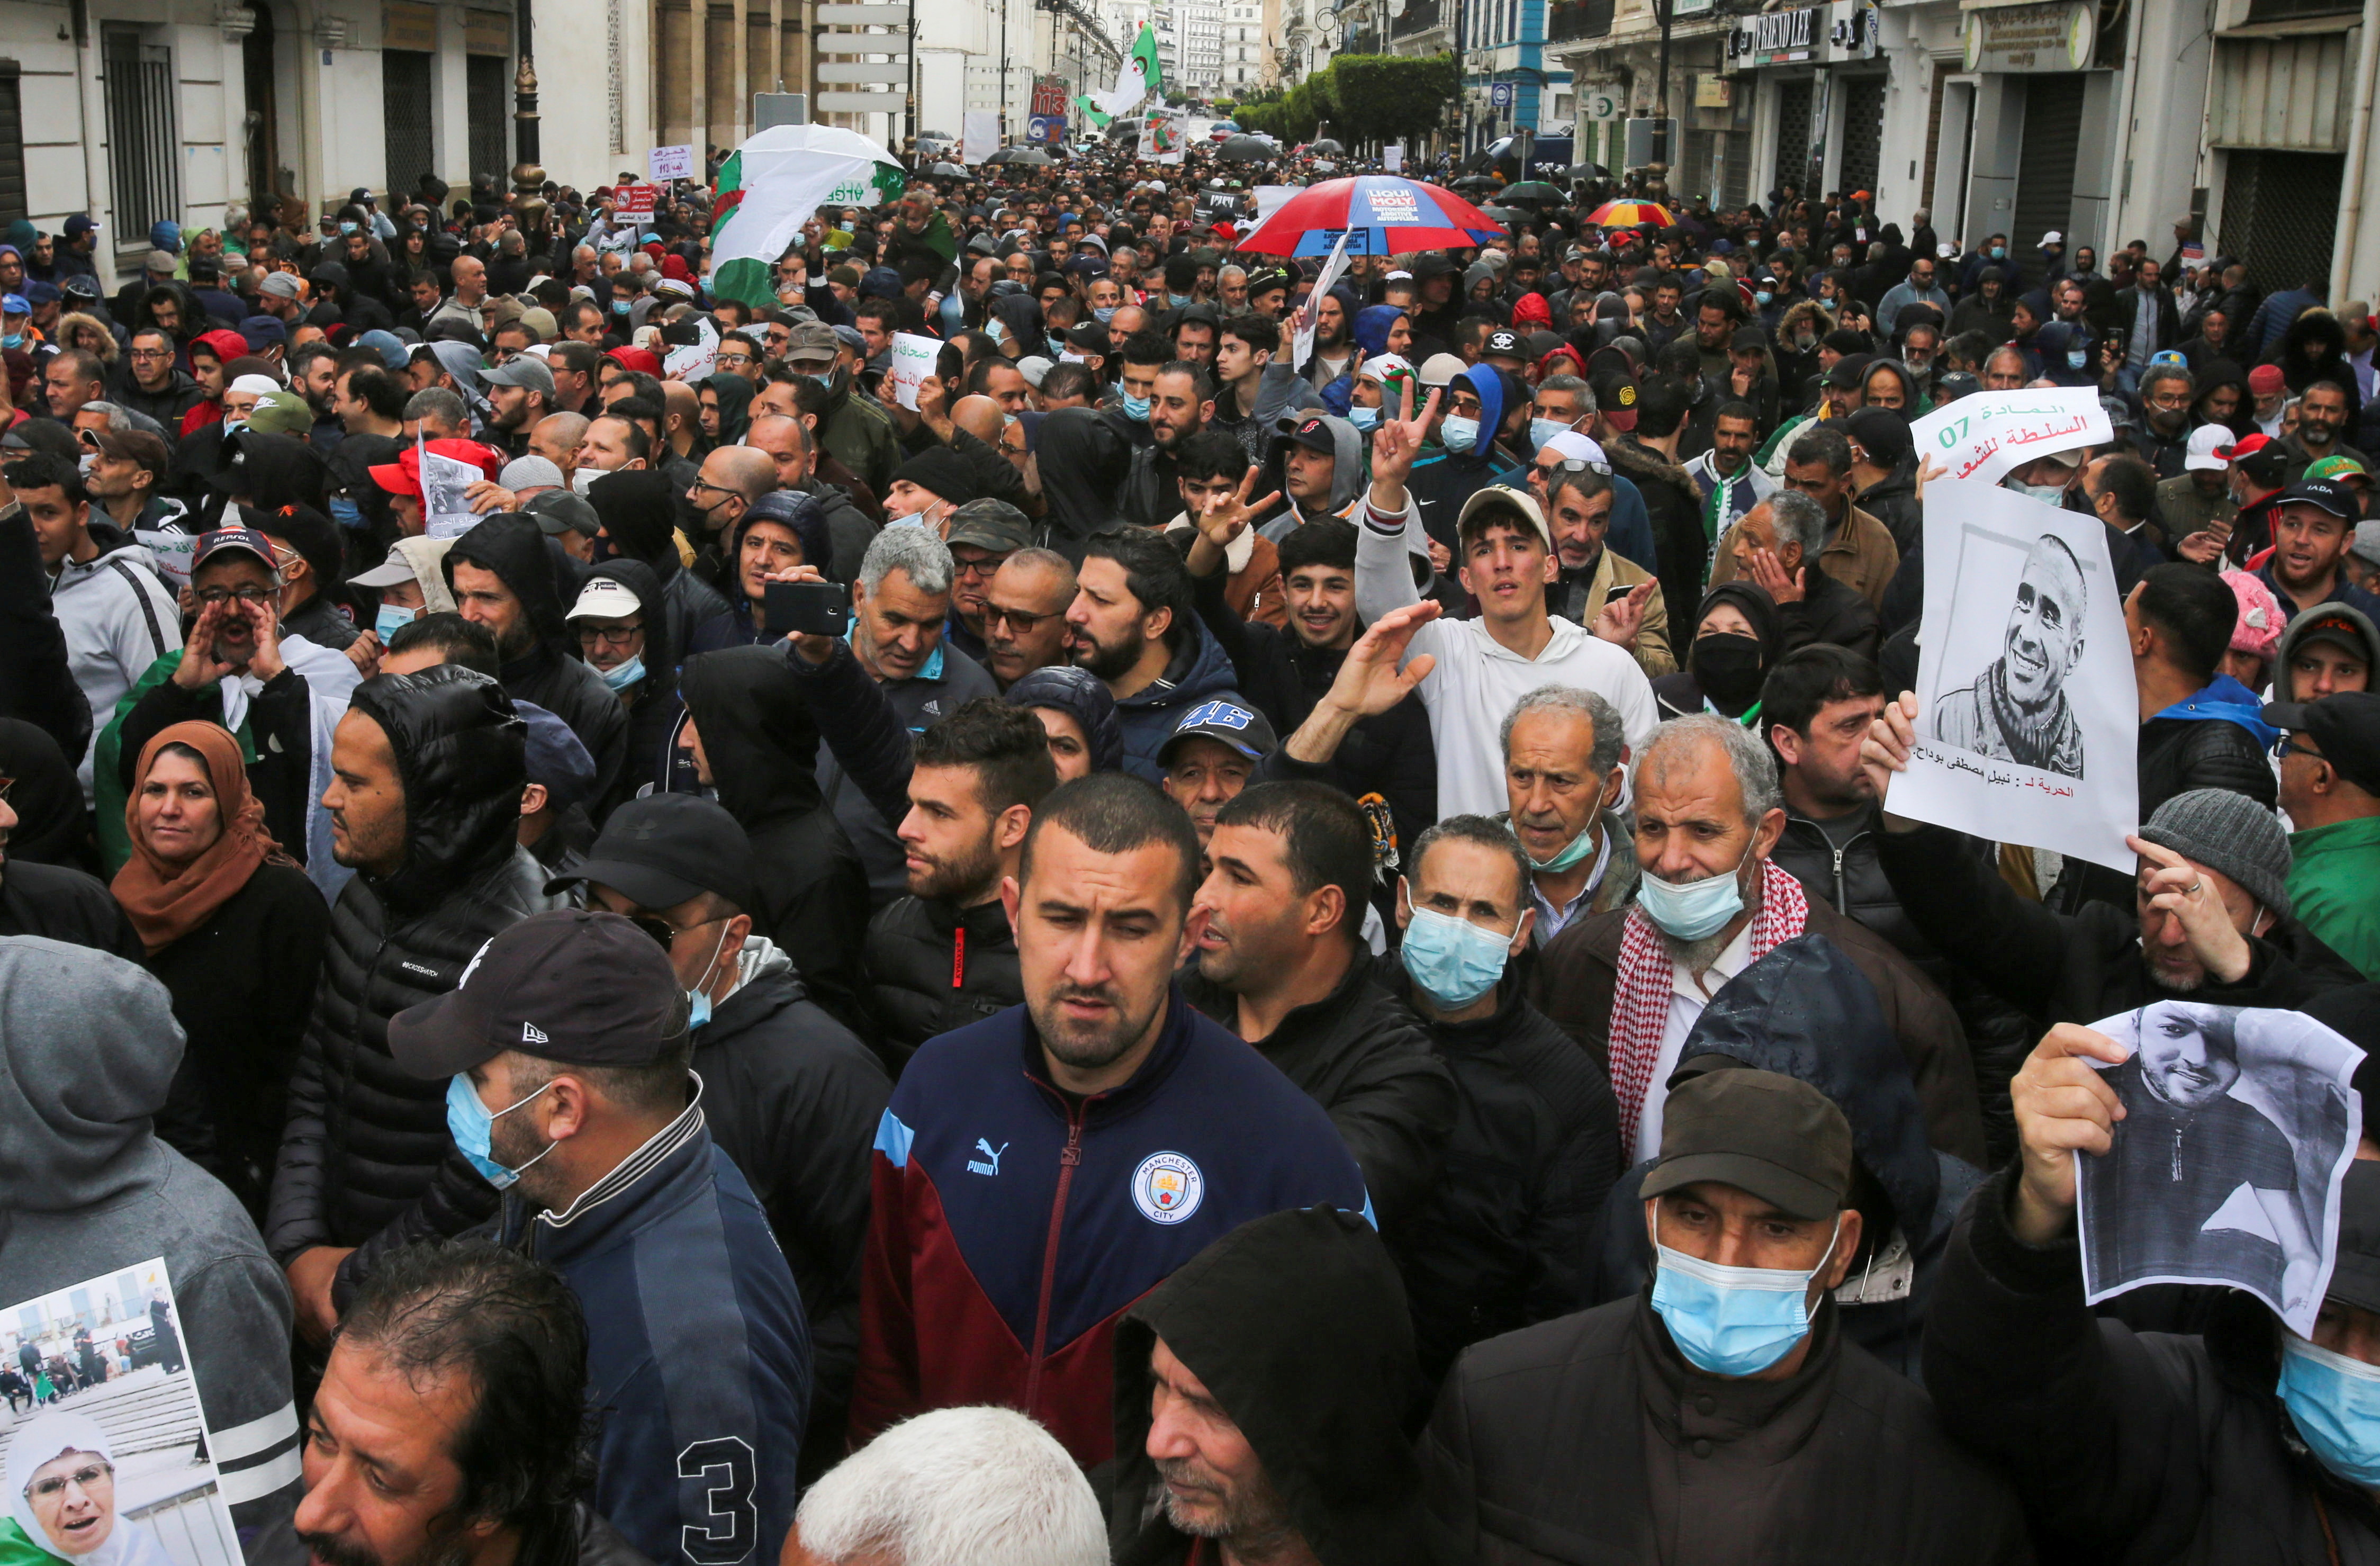 Demonstrators march during a protest demanding political change, in Algiers